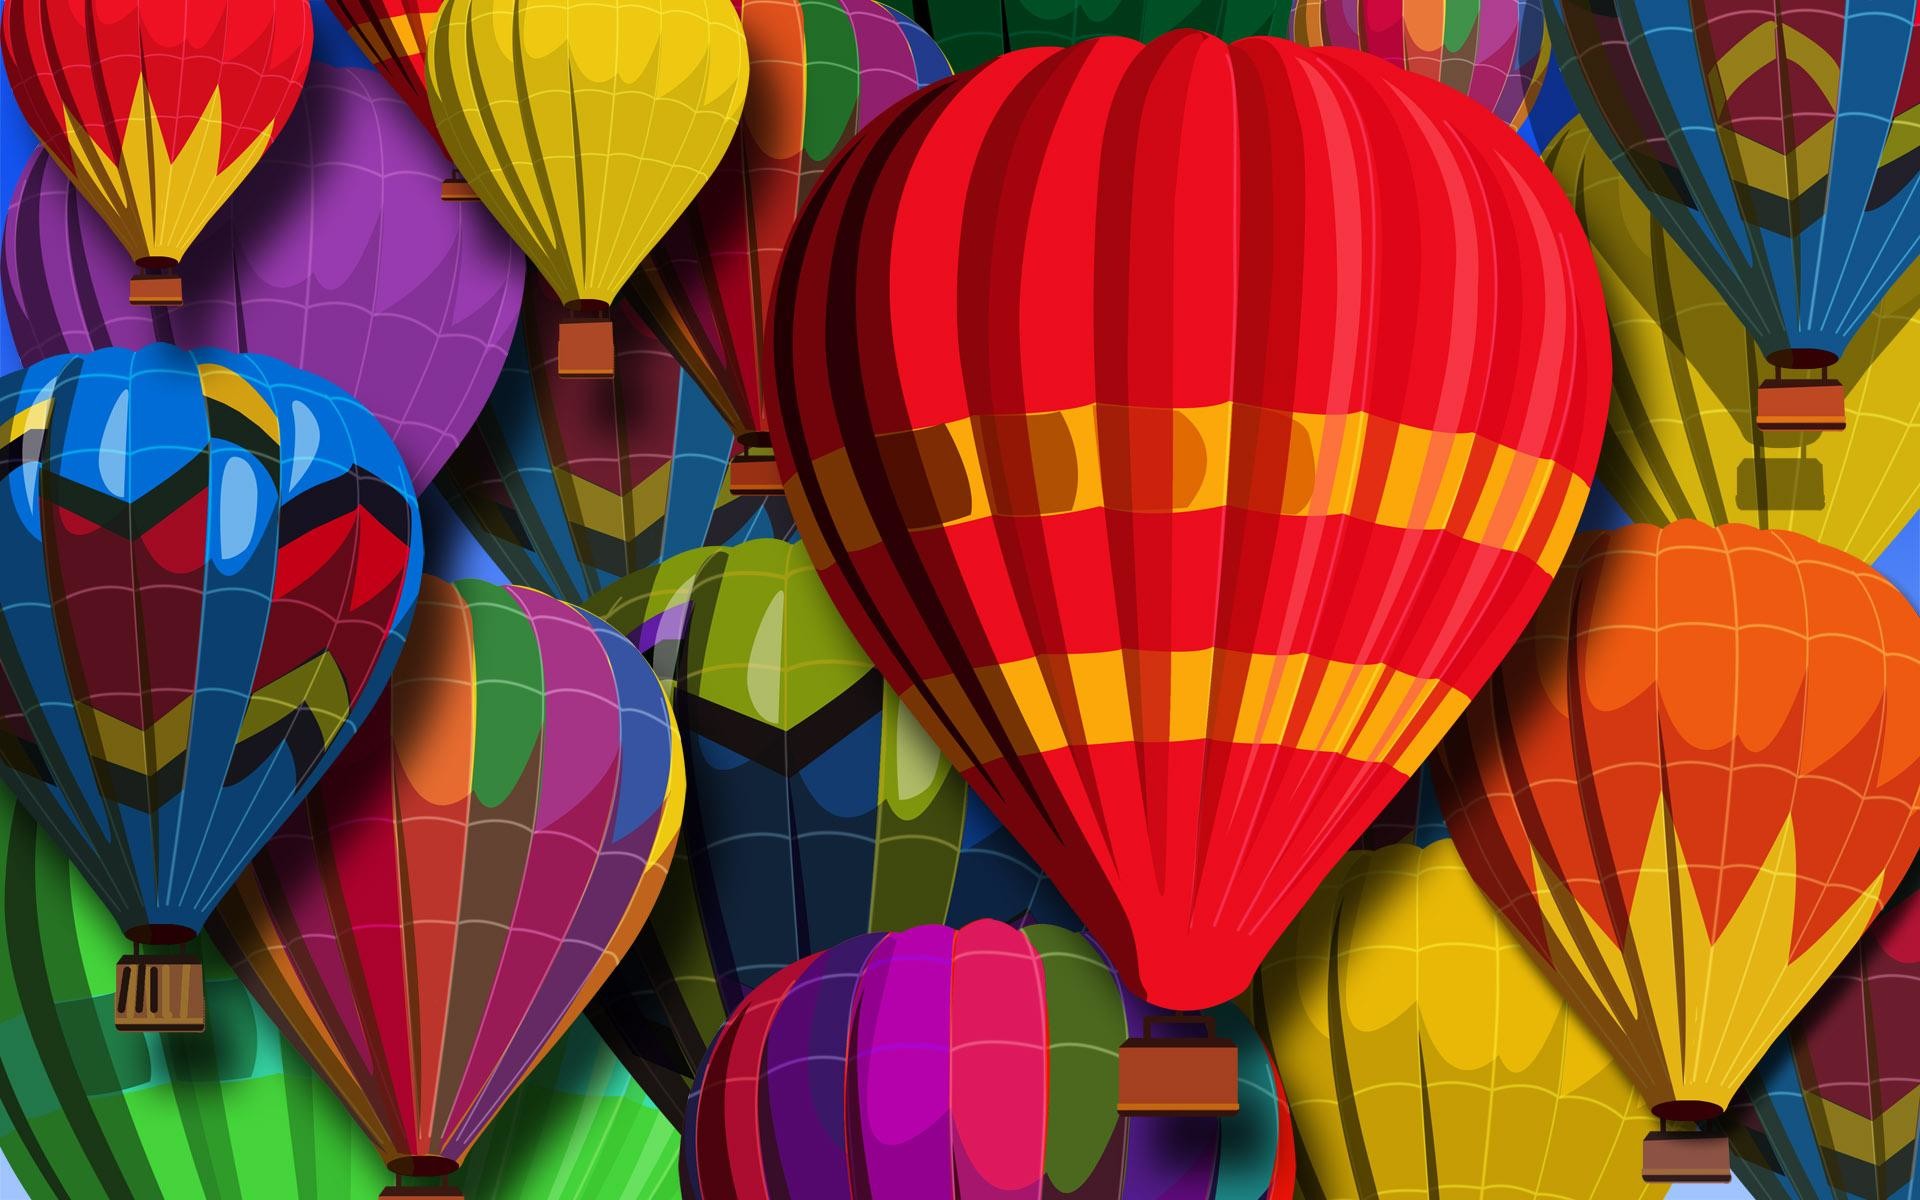 1920x1200 Balloons Images wallpapers Wallpapers) – Wallpapers and Backgrounds